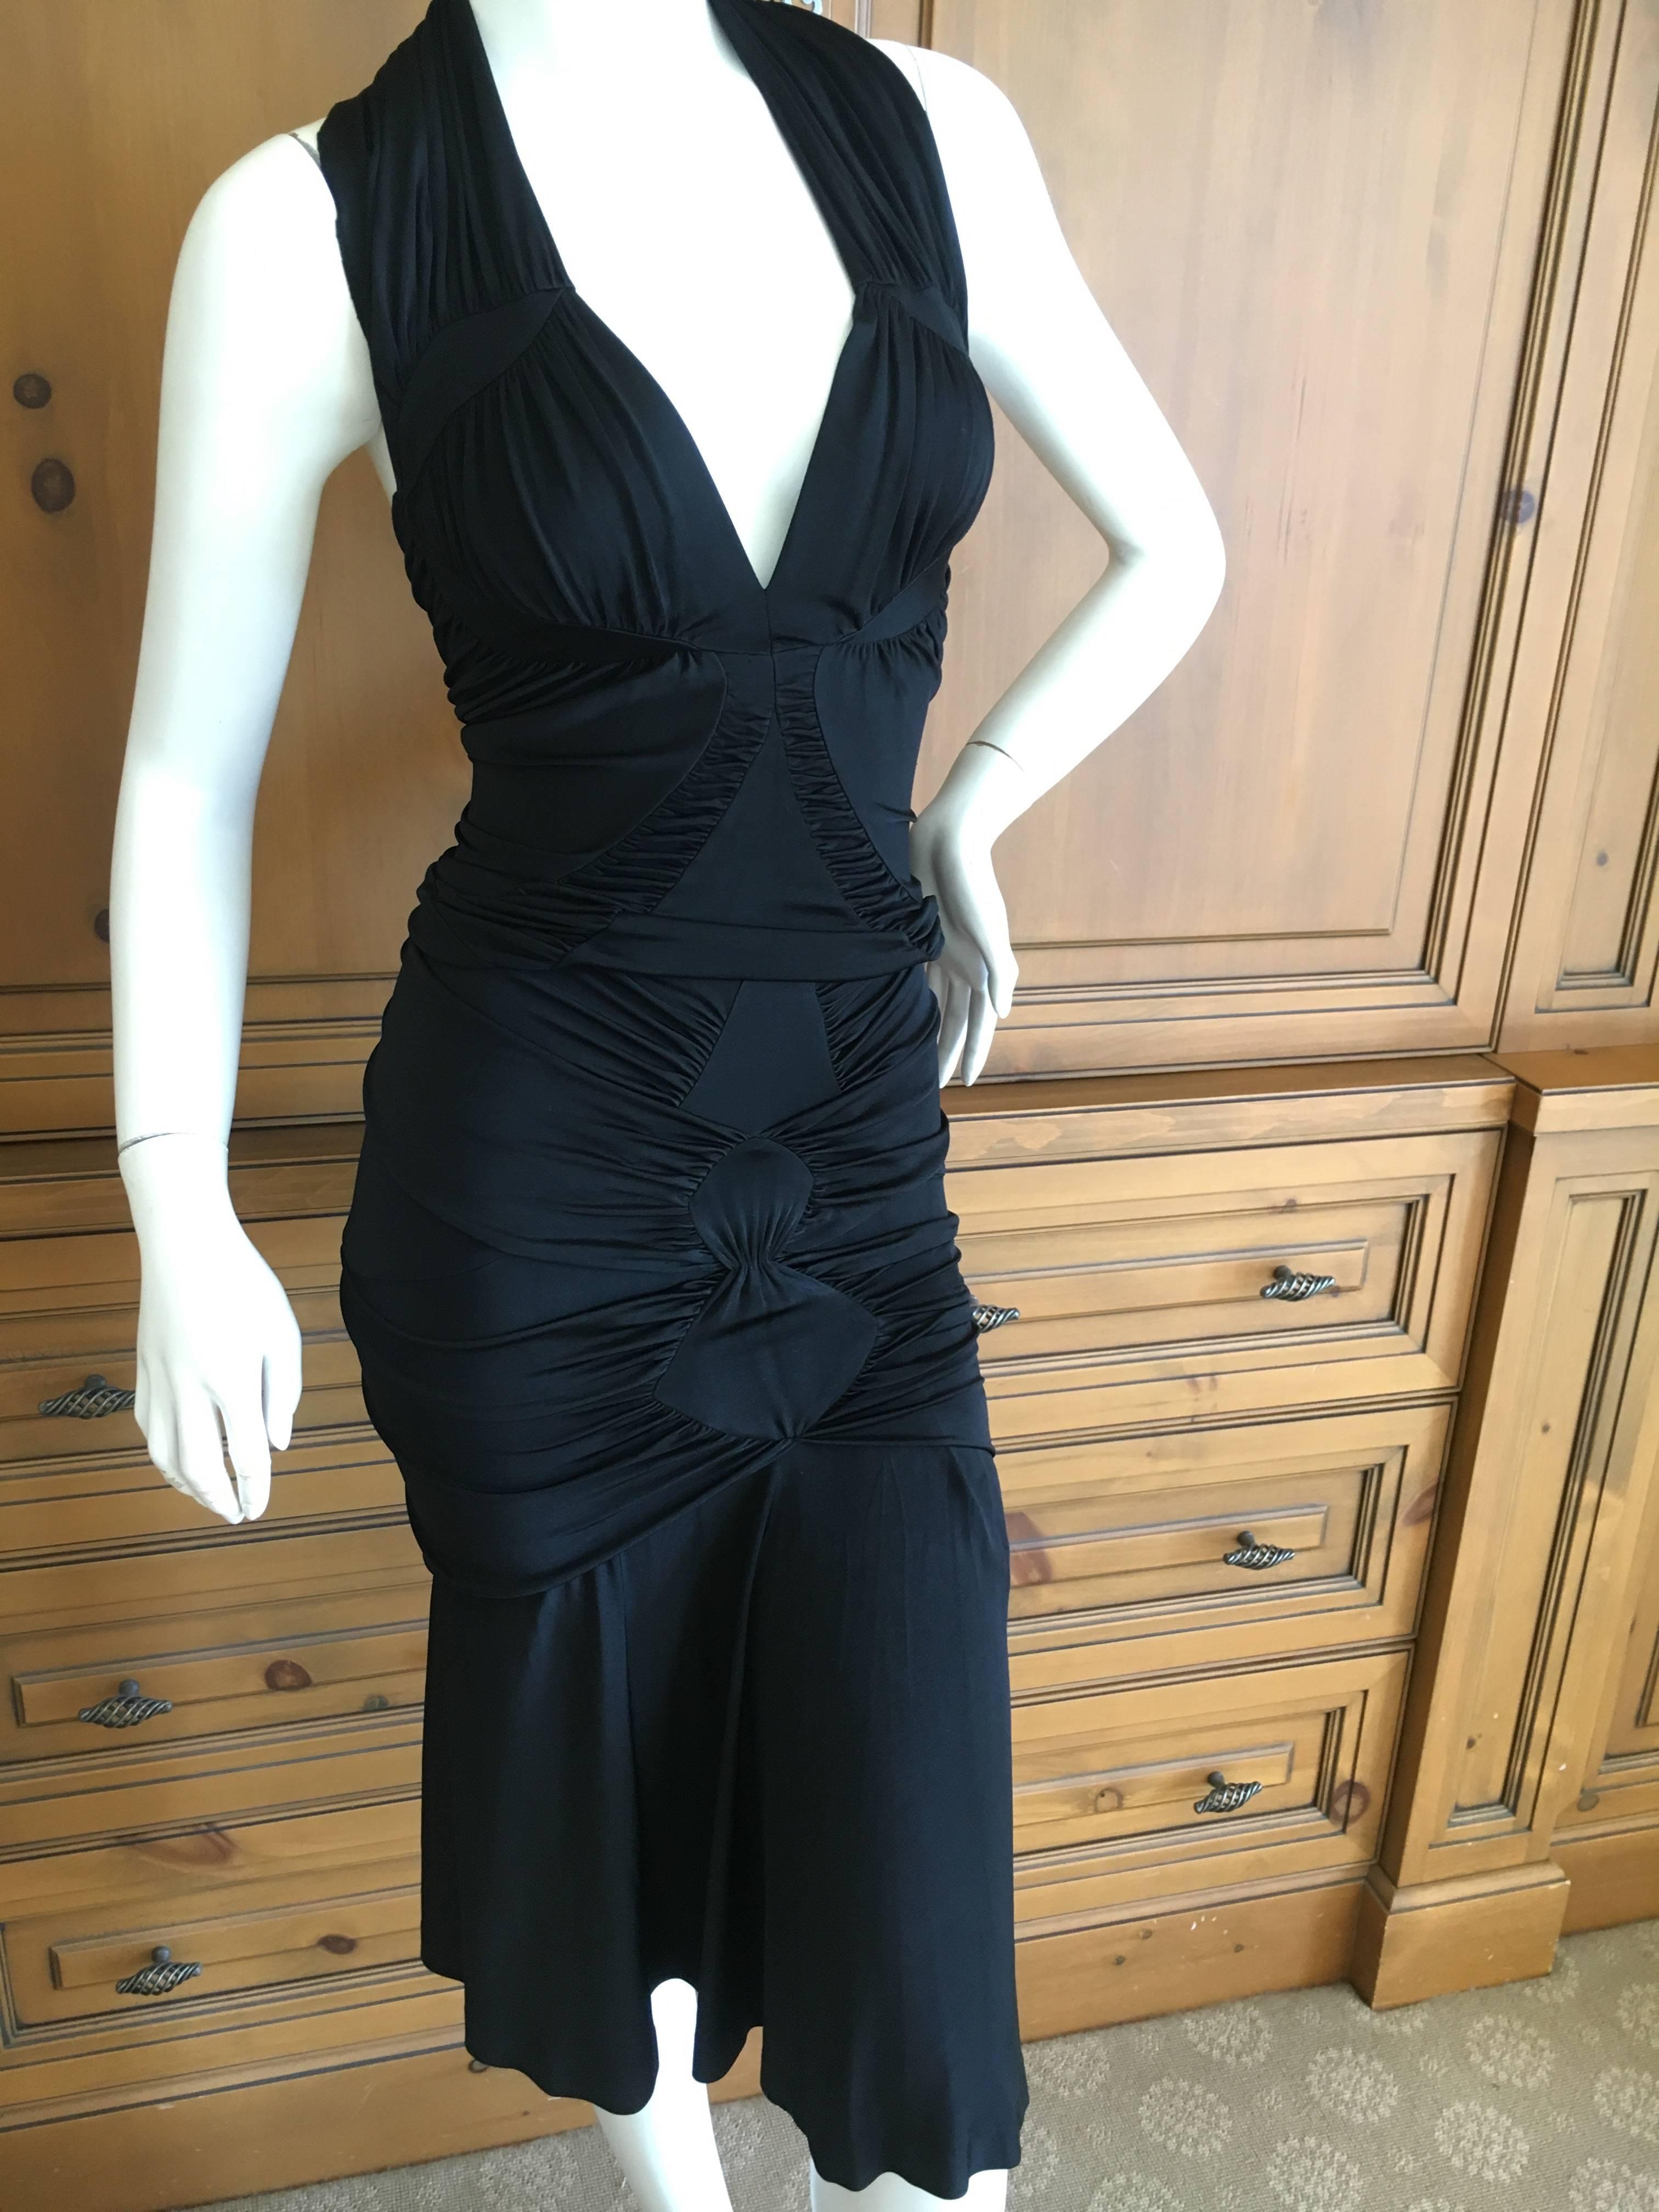 Yves Saint Laurent by Tom Ford Black Two Piece Cocktail Dress For Sale 2